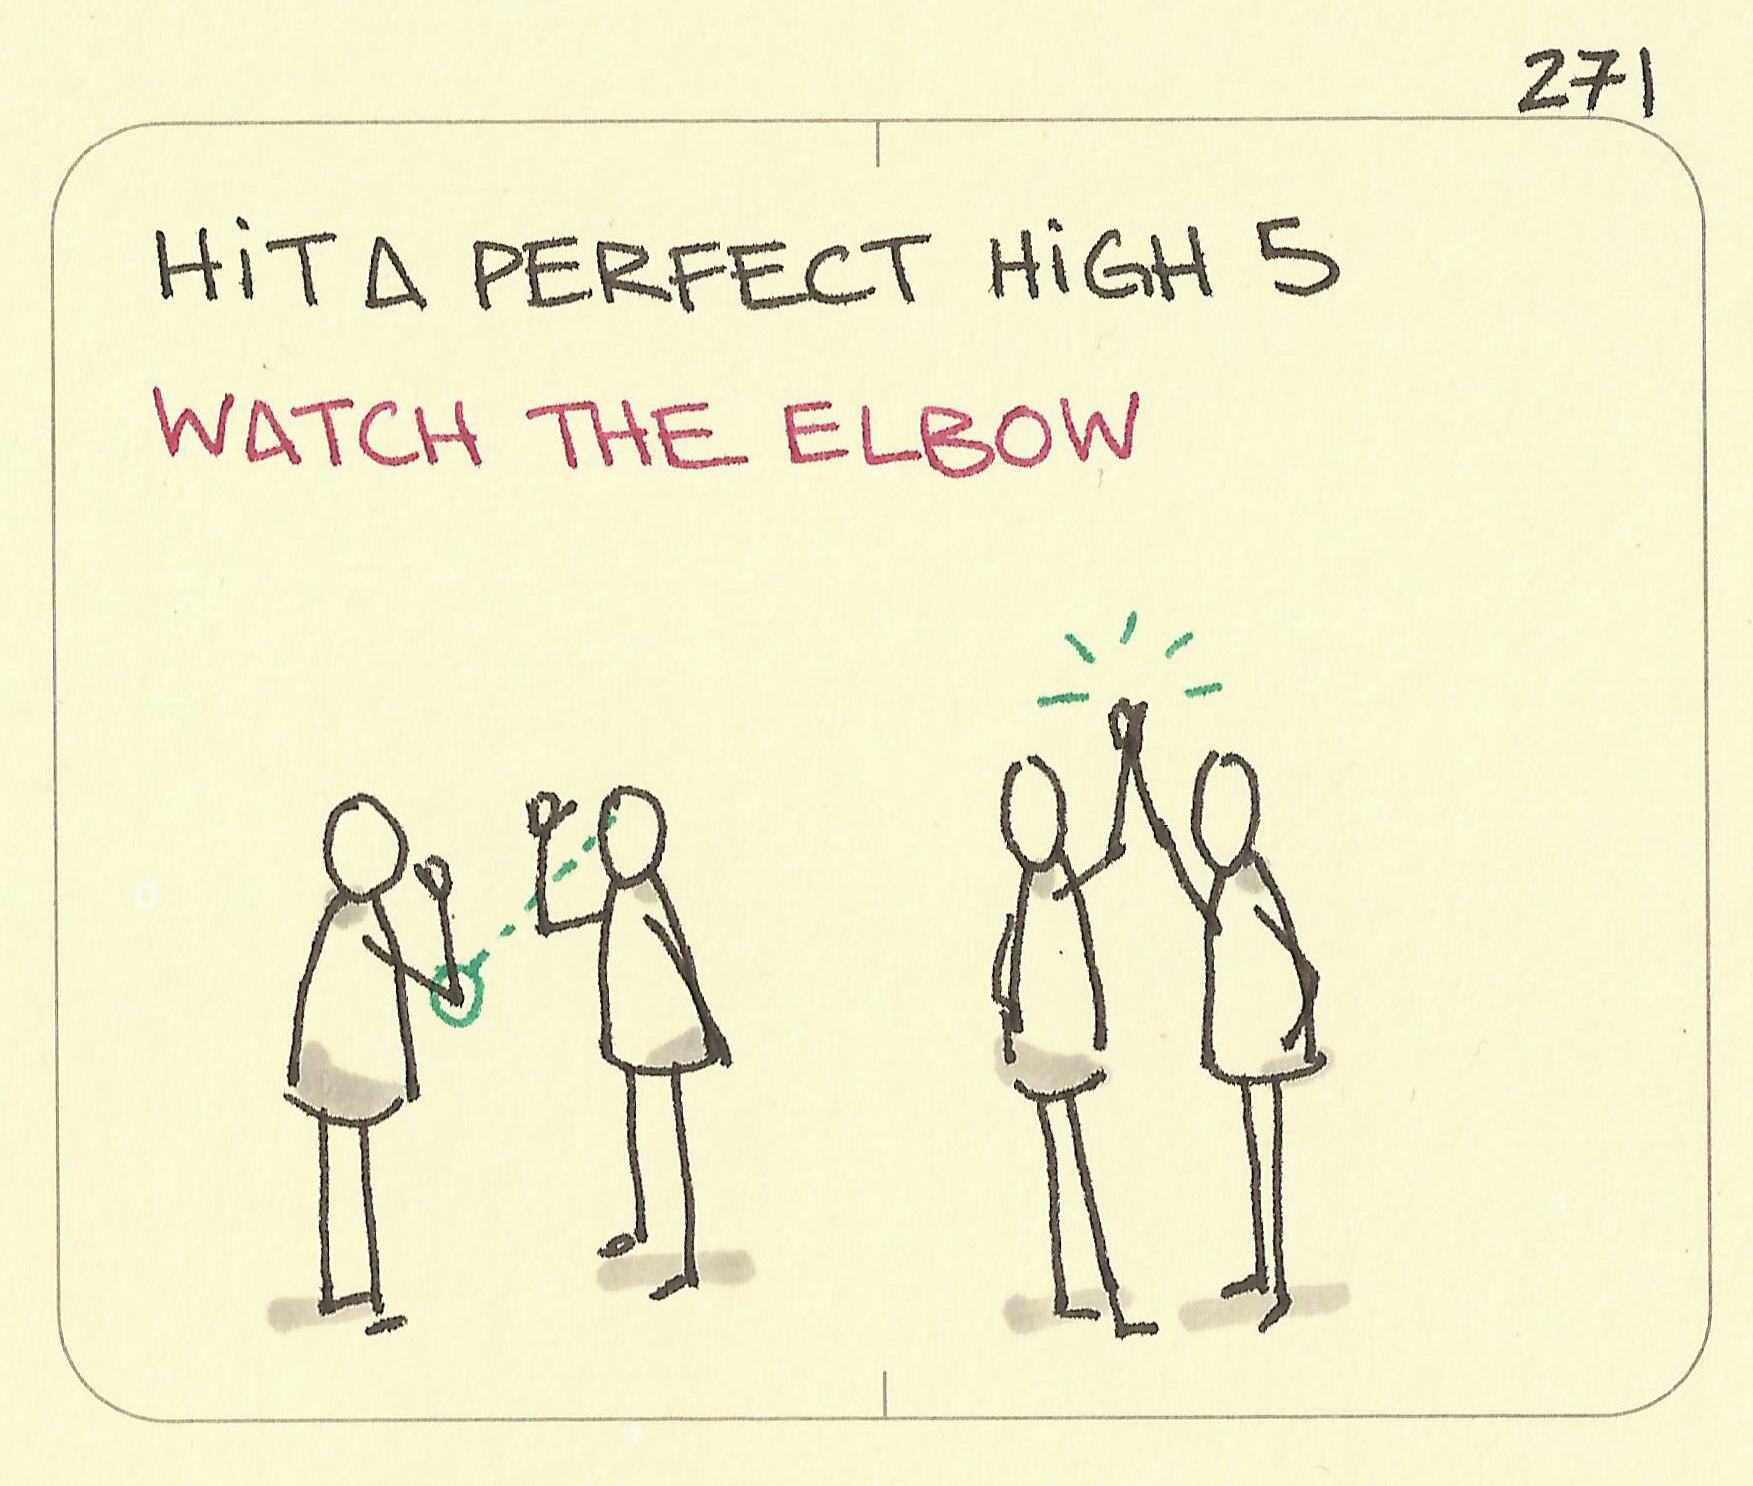 Hit a perfect high 5 - Sketchplanations